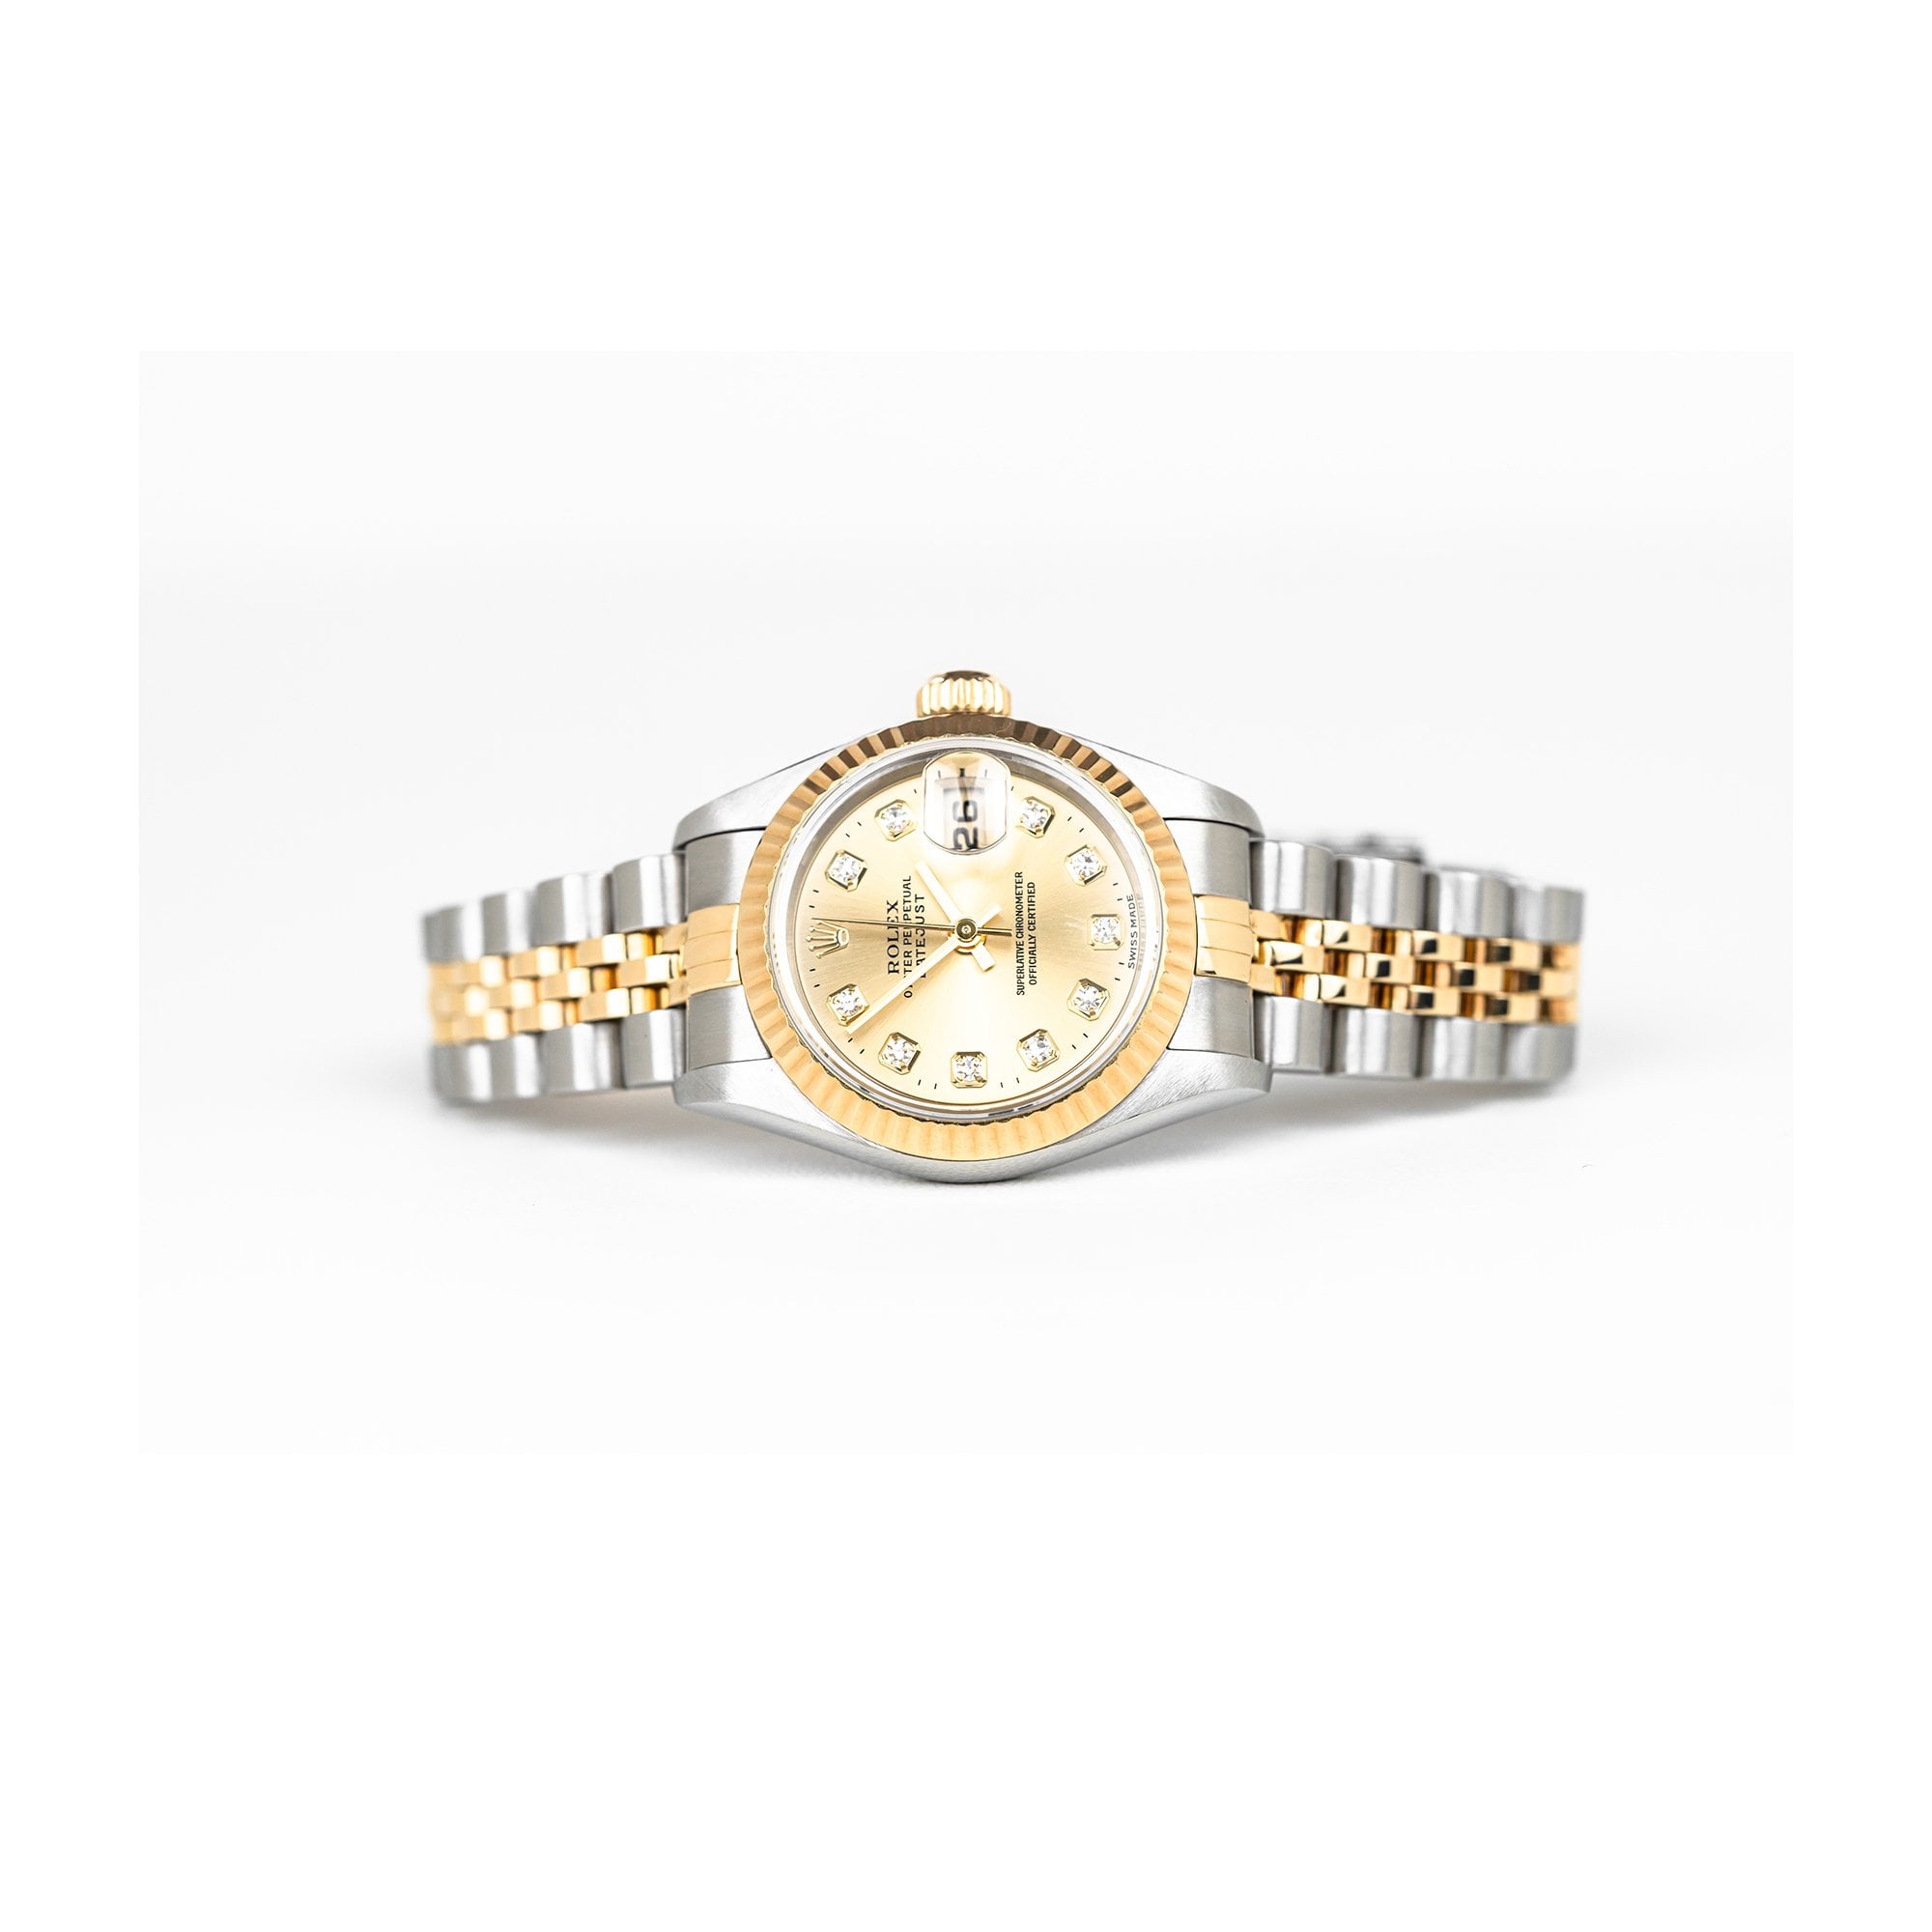 The Elegance and Excellence of Woman Rolex Watch